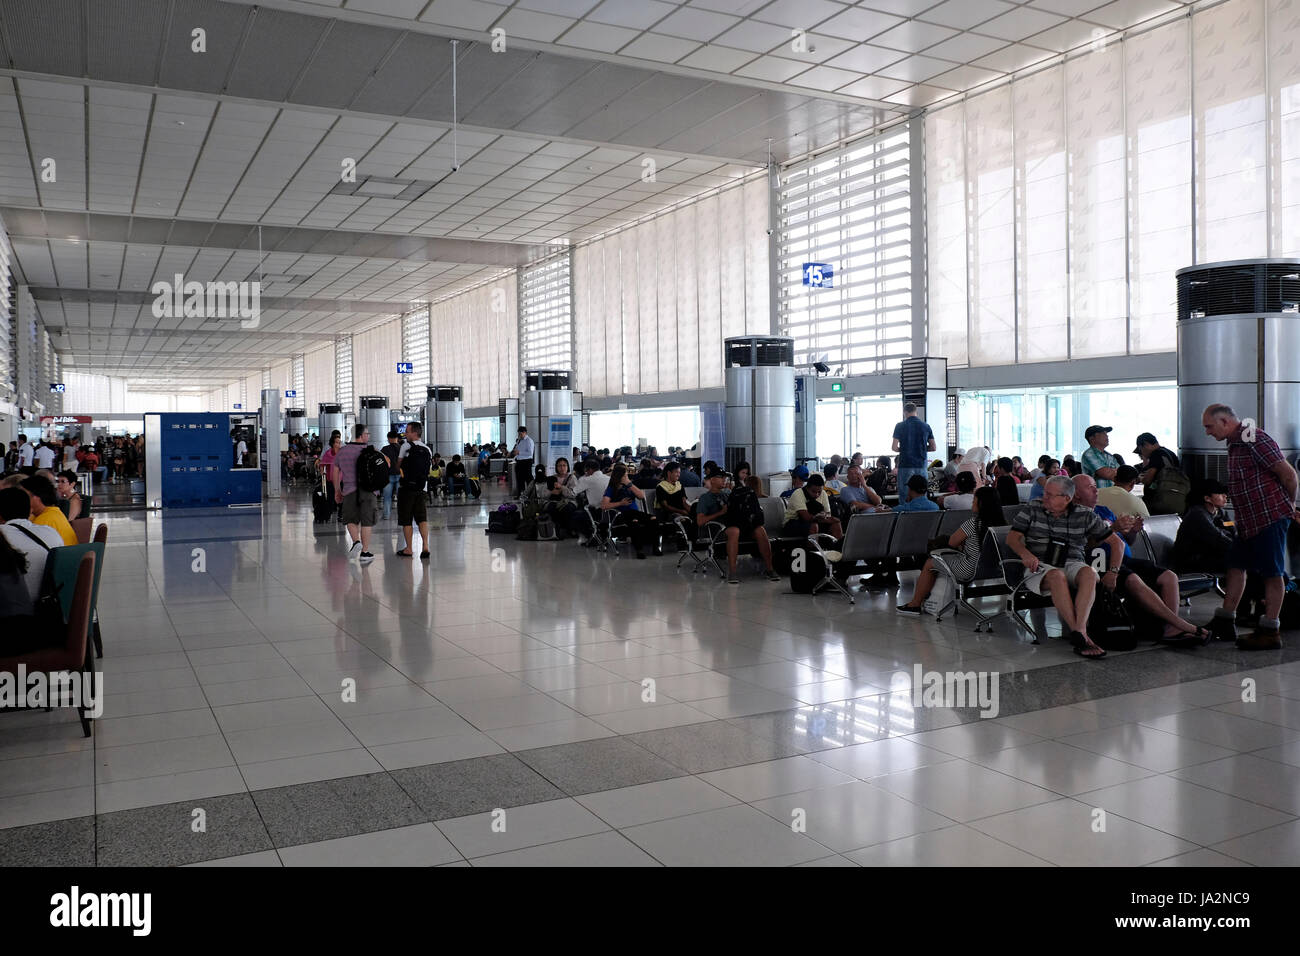 Passengers wait for their flight at the departure hall of terminal 3 of The Ninoy Aquino International Airport or NAIA, also known as Manila International Airport, Philippines Stock Photo